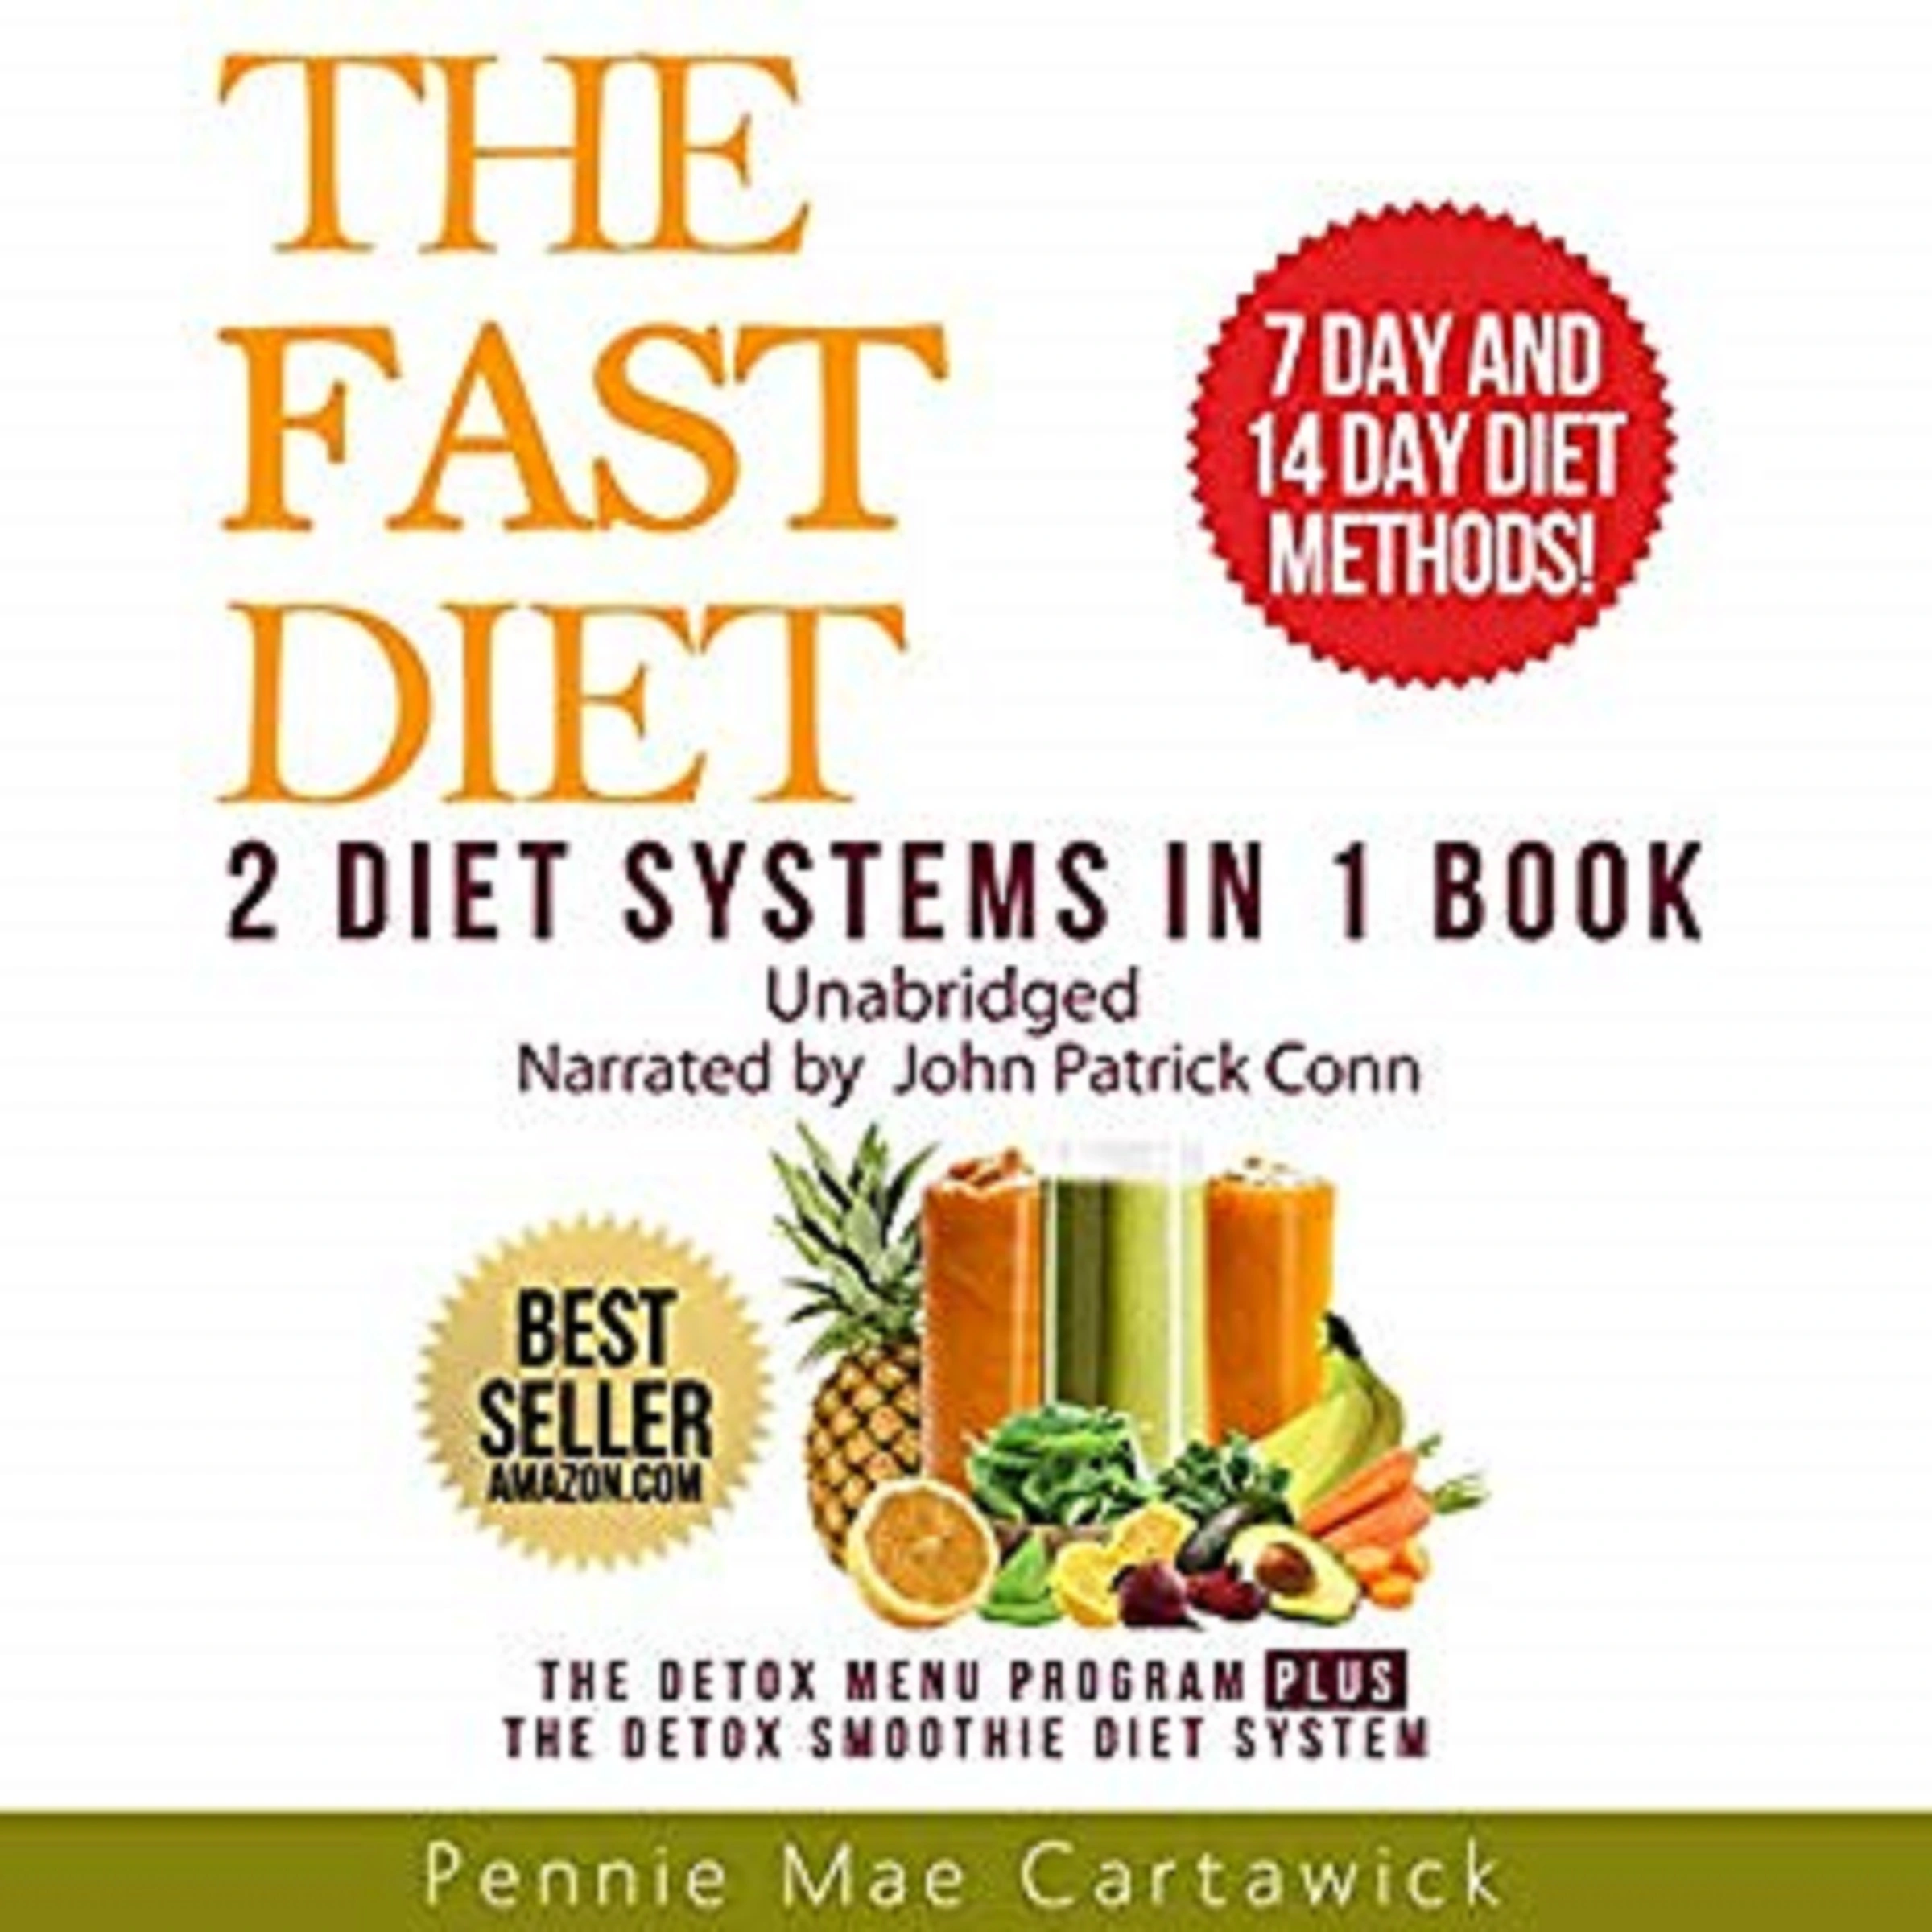 The Fast Diet: 2 Diet Systems in 1 Book Audiobook by Pennie Mae Cartawick